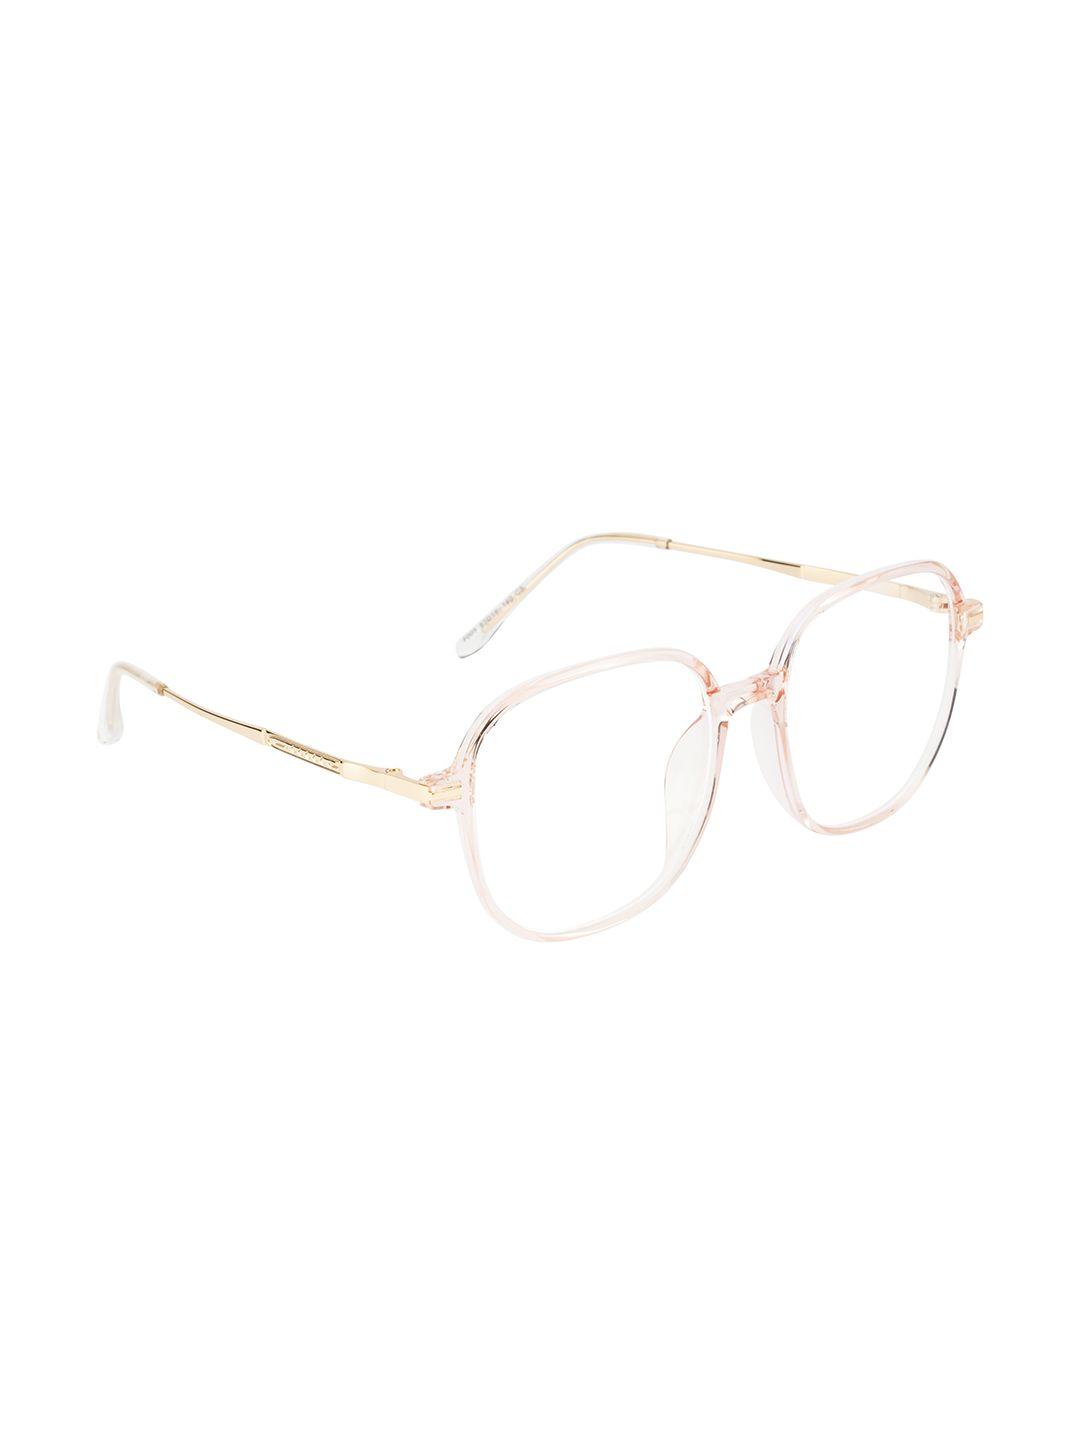 ted smith unisex pink & gold-toned full rim round frames